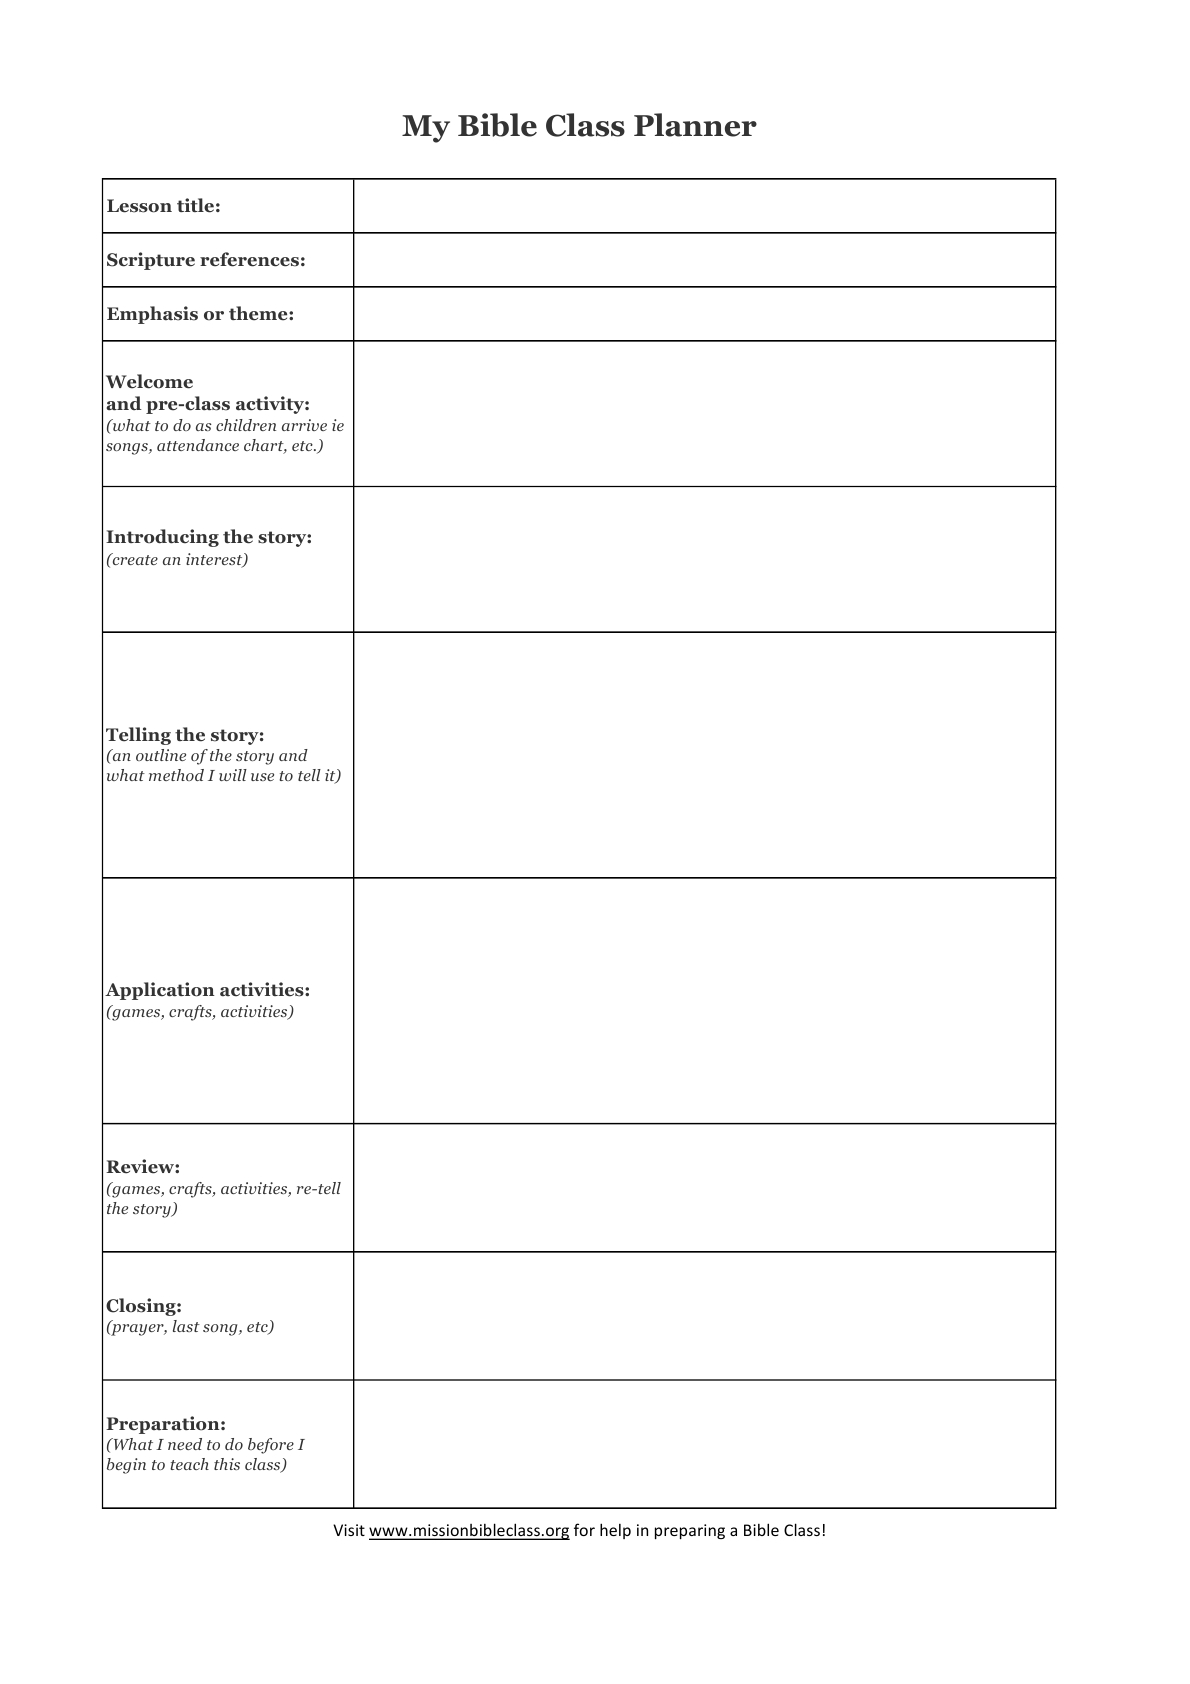 Blank Lesson Plan Templates To Print | Lesson Planning | Blank for Template For Monthly Calendar Lesson Plans For Childrens Church